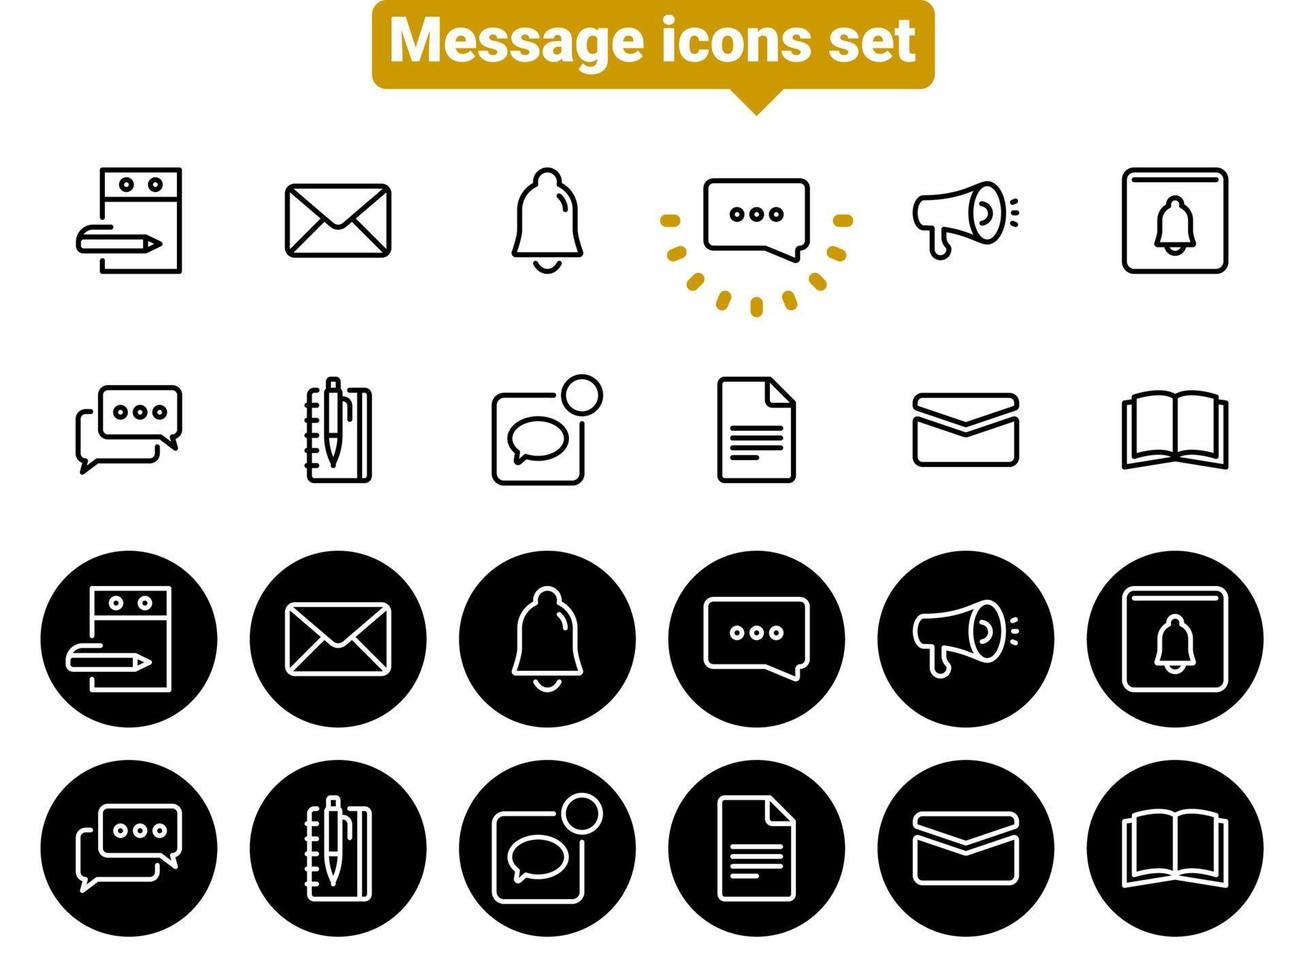 Set of black vector icons, isolated against white background. Flat illustration on a theme messages, notifications, chats, conversations. Line, outline, stroke